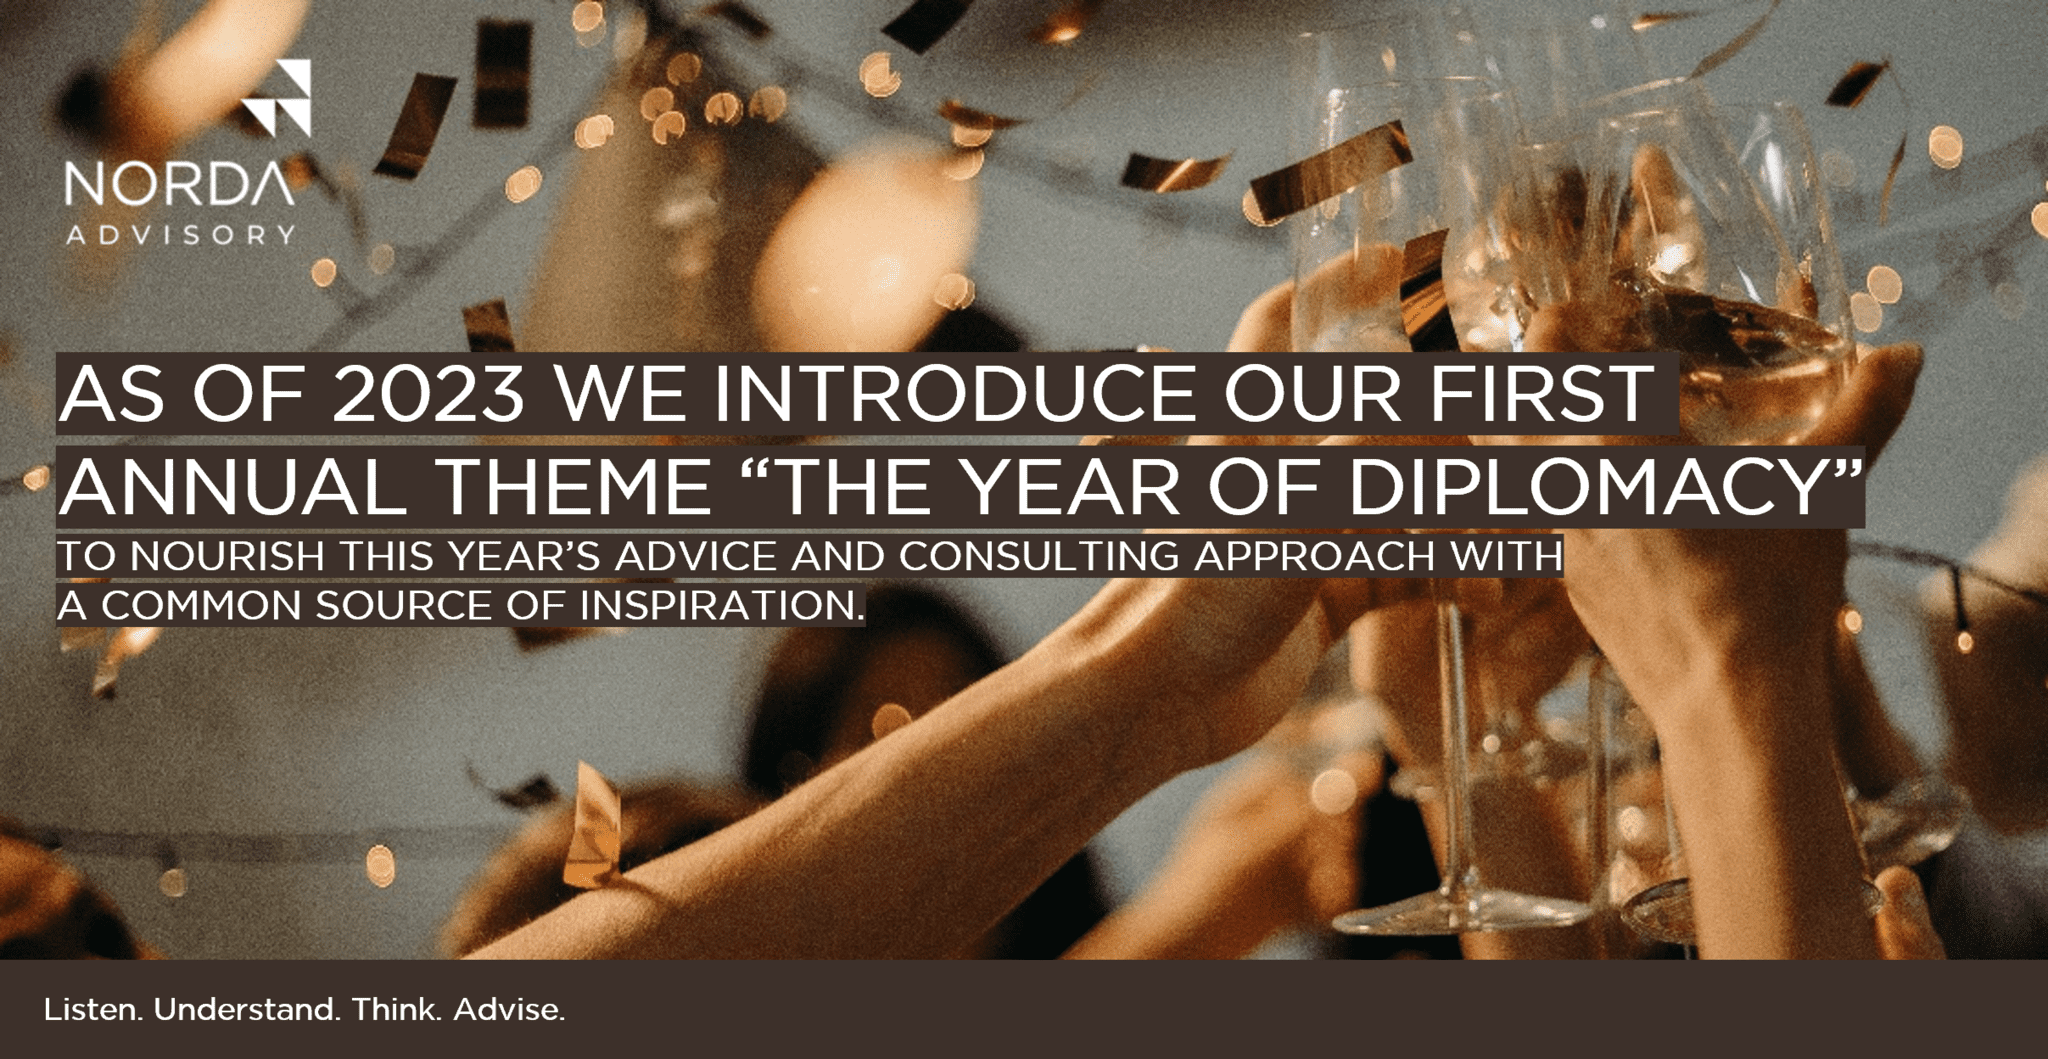 2023 Annual Theme “The Year of Diplomacy”